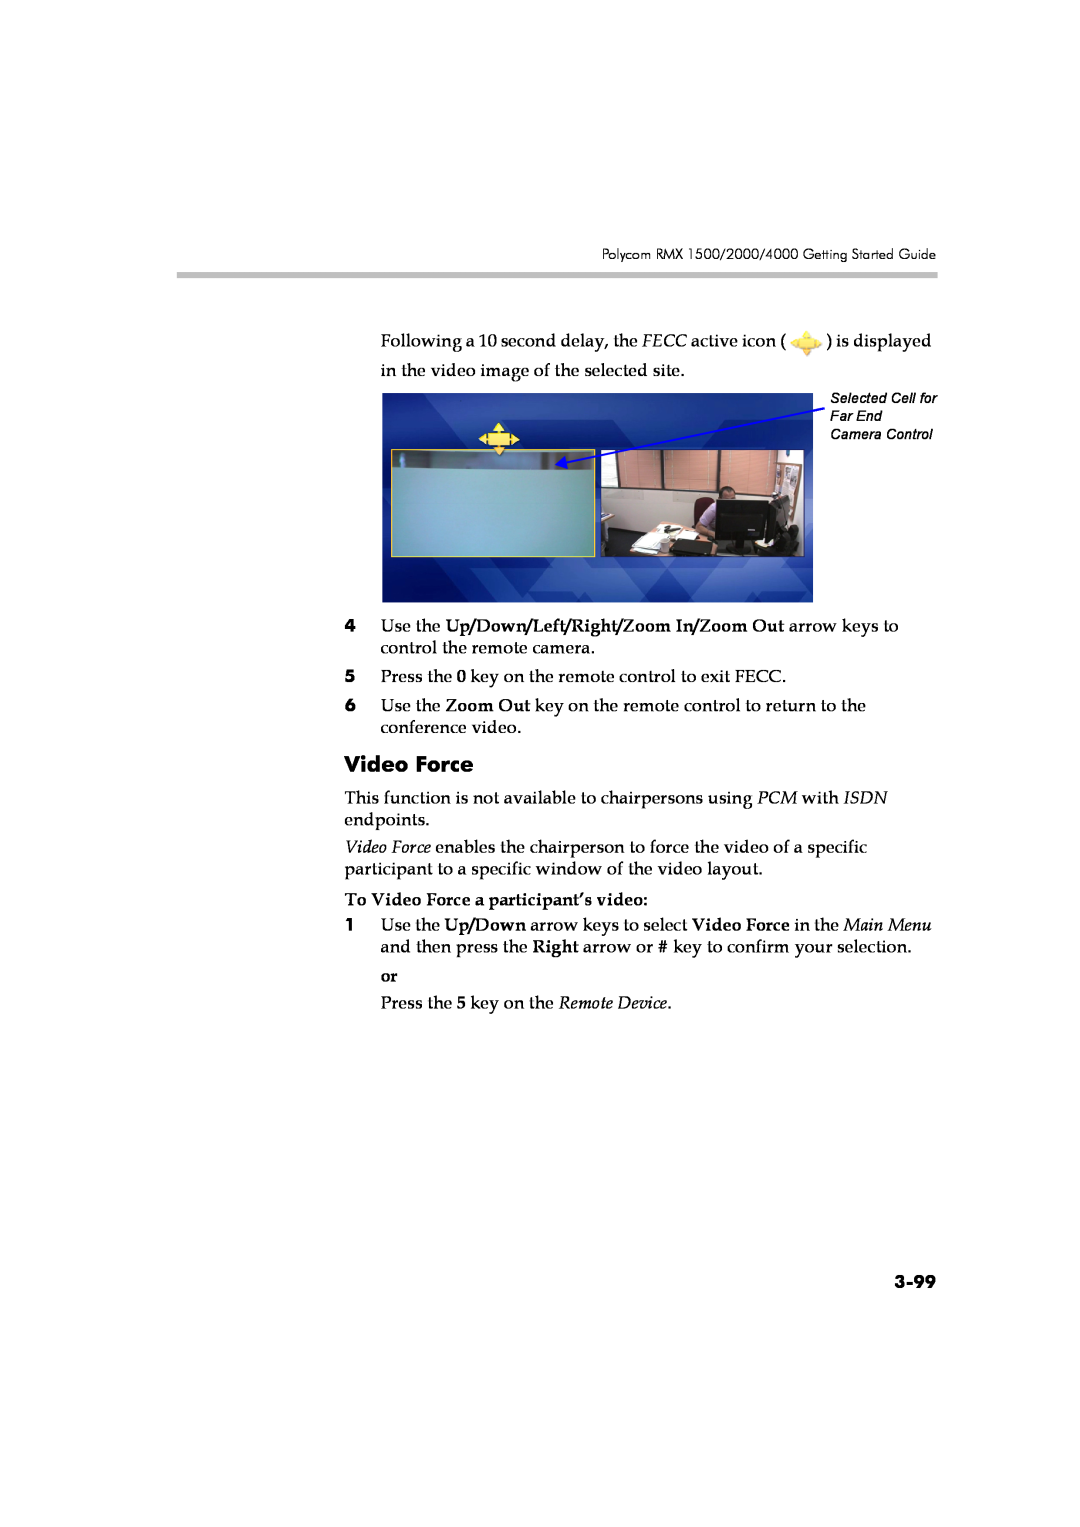 Polycom DOC2560B manual To Video Force a participant’s video, 3-99 